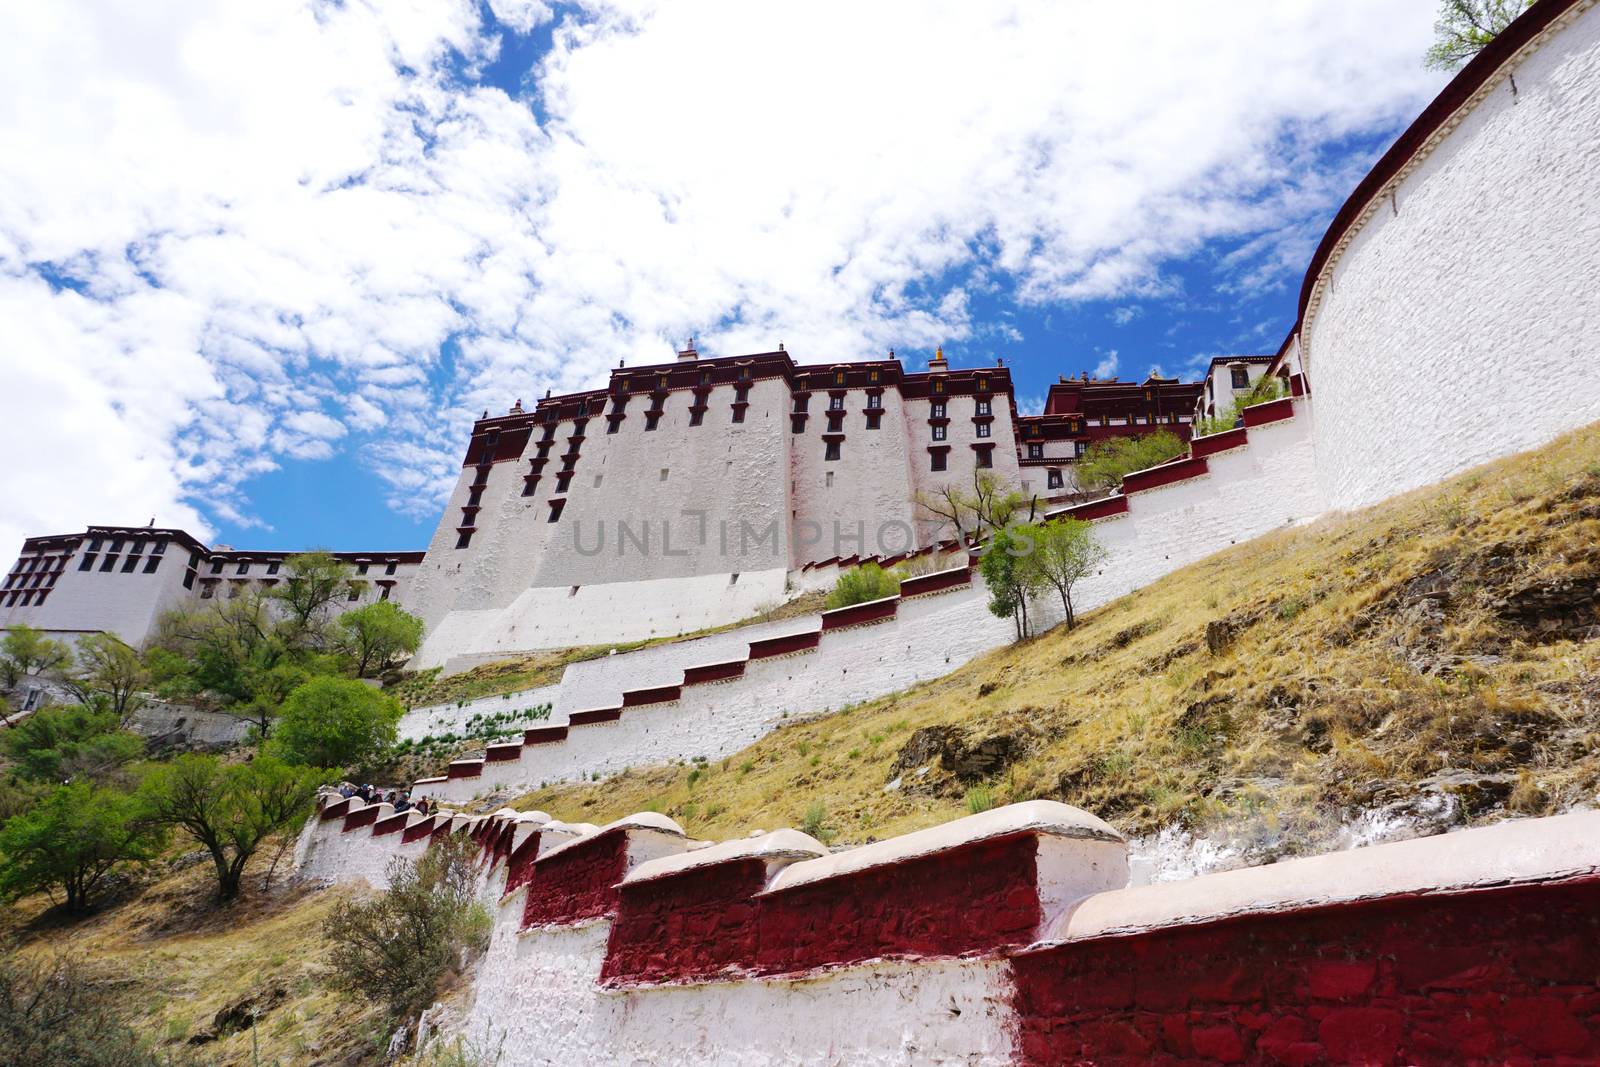 The Potala palace wall in Lhasa, Tibet